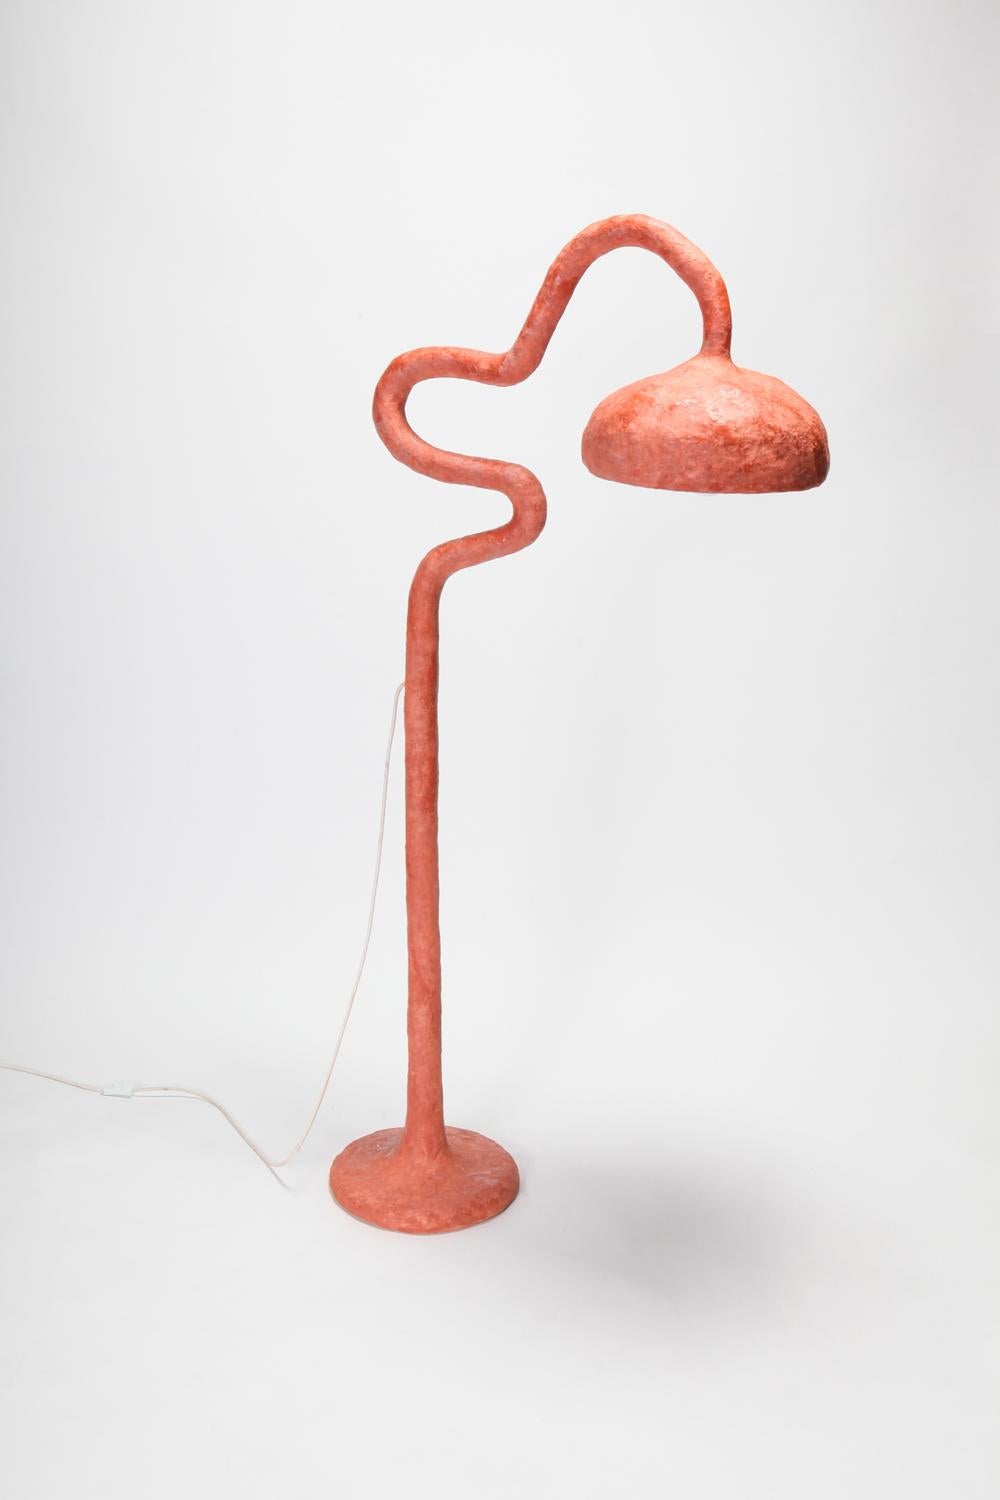 The ‘Cotta’ floor lamp is a unique piece from the 'Cotta' collection by Italian design and research factory, Decio Studio. Functional and collectable art piece created at alfa.brussels for Everyday Gallery in 2019. 

